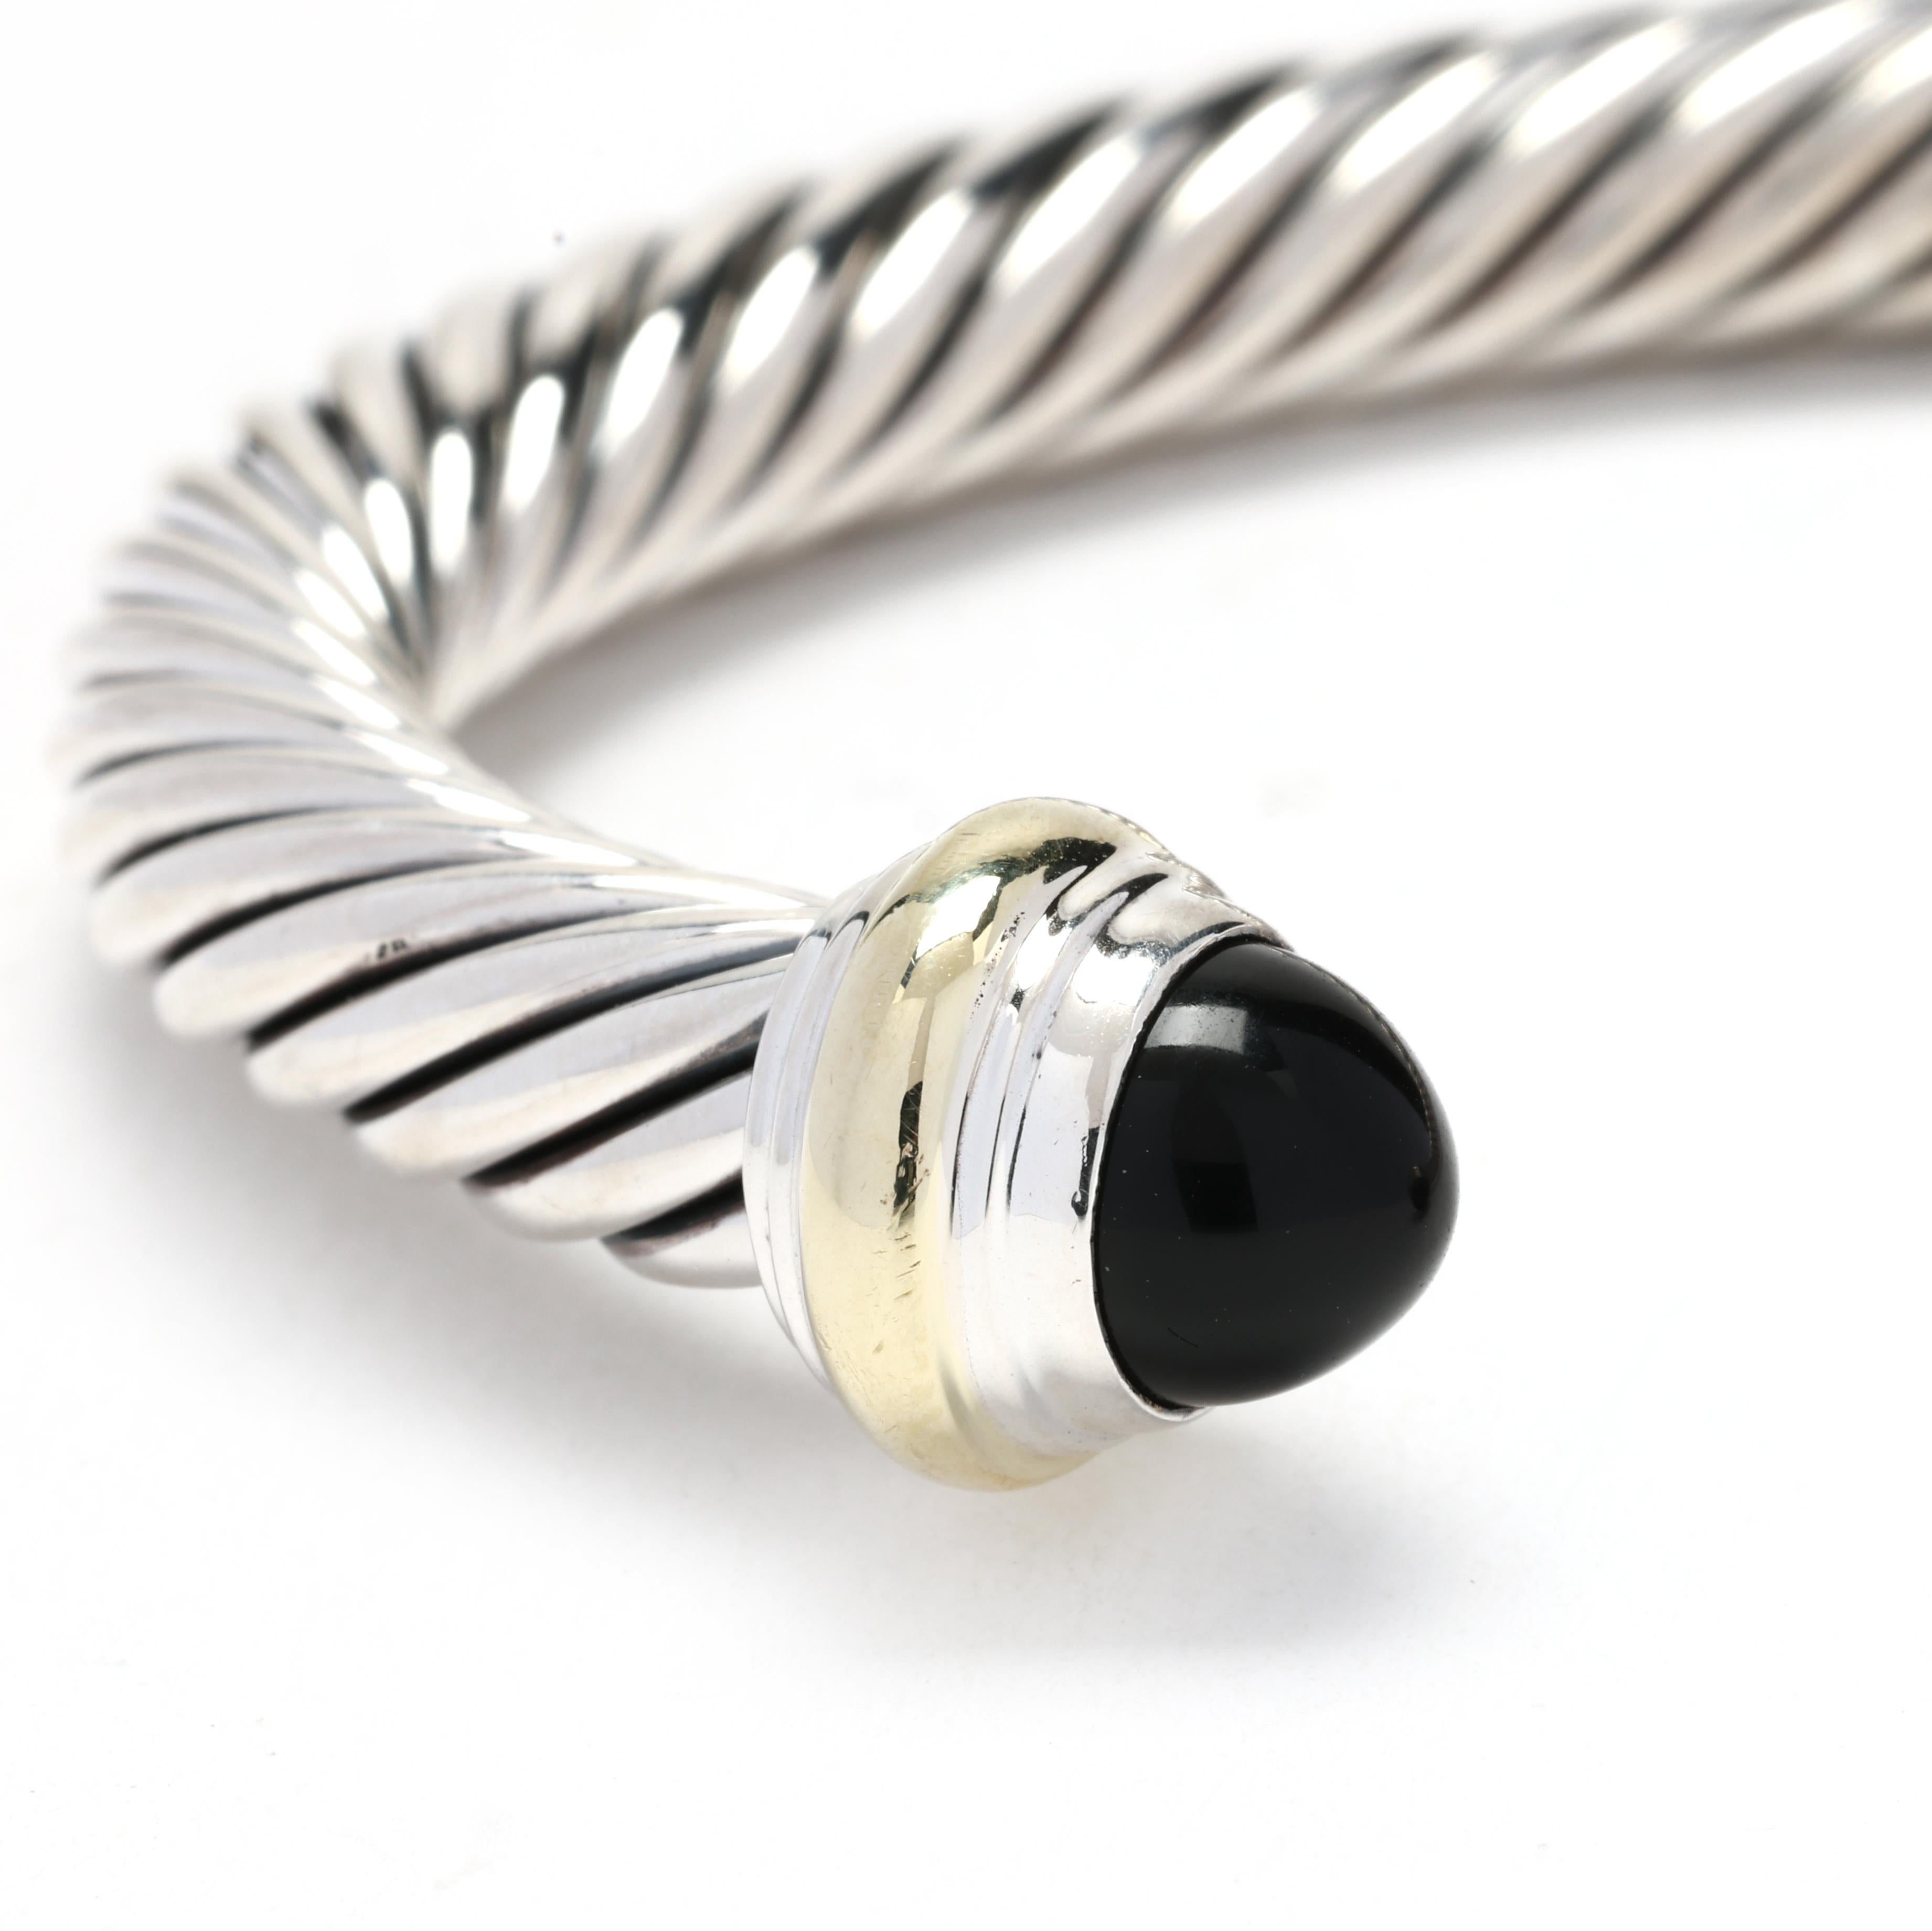 This classic David Yurman black onyx cable classic cuff bracelet is an iconic piece from the celebrated designer. Crafted from sterling silver and accented with 14k yellow gold, this bracelet features a black onyx gemstone at the center, adding a